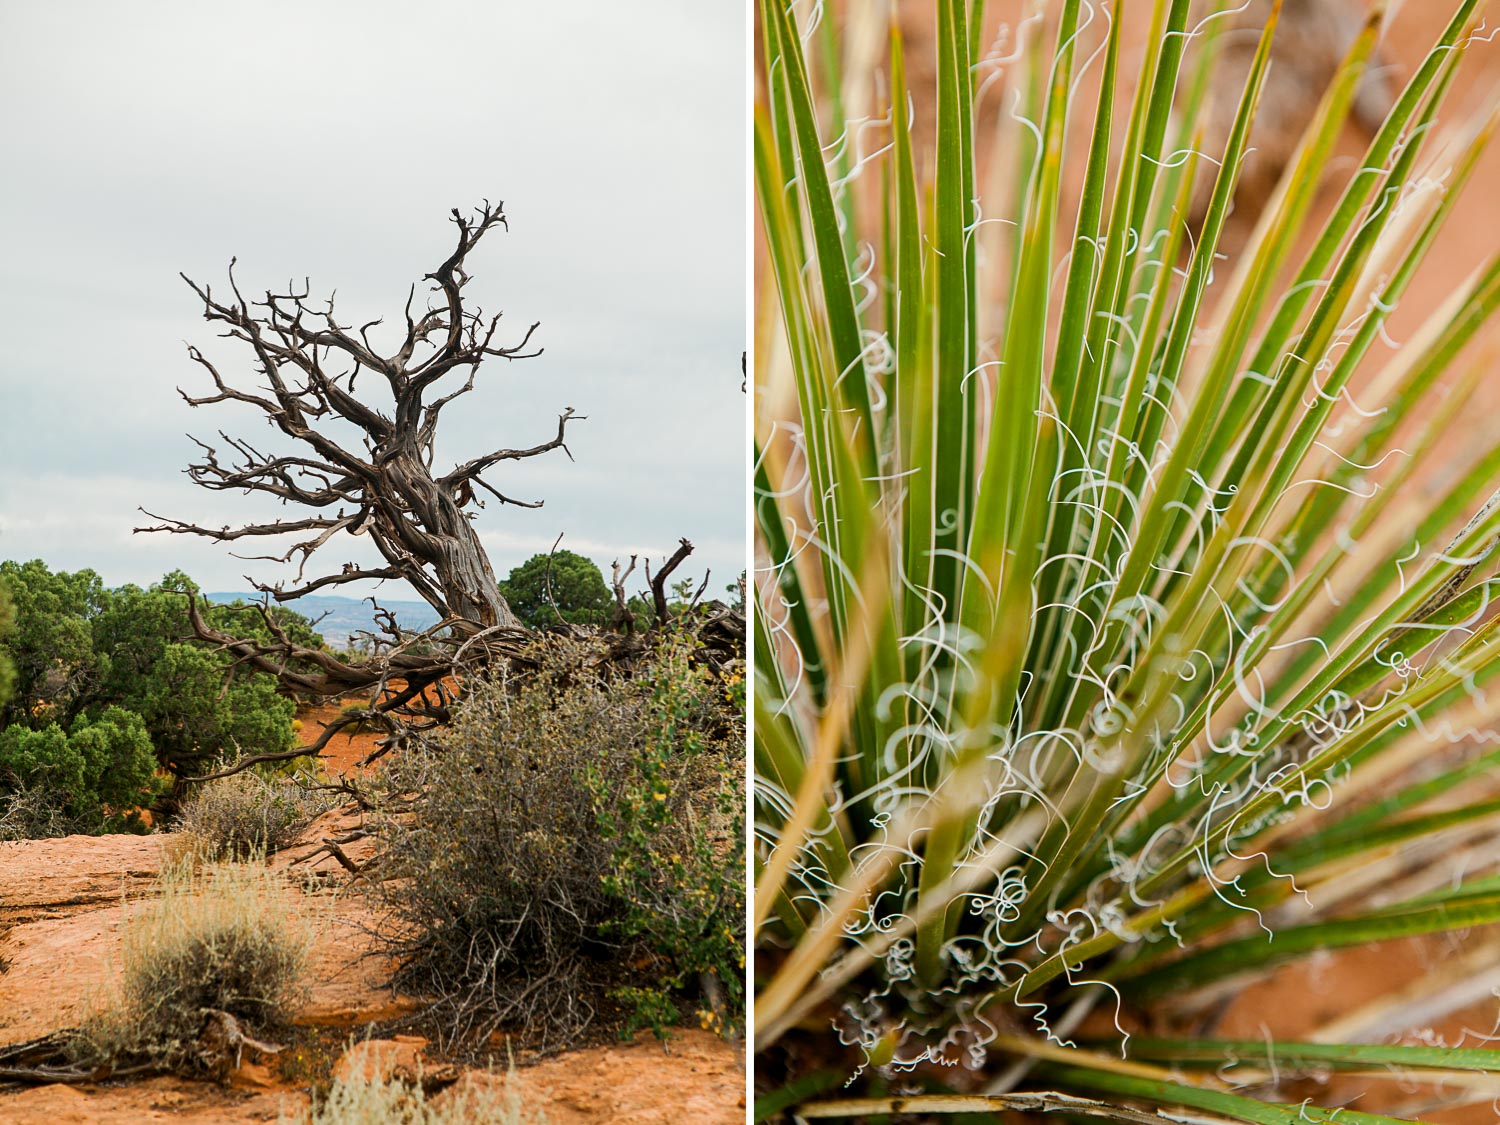 A dead tree in the desert and Yucca plants